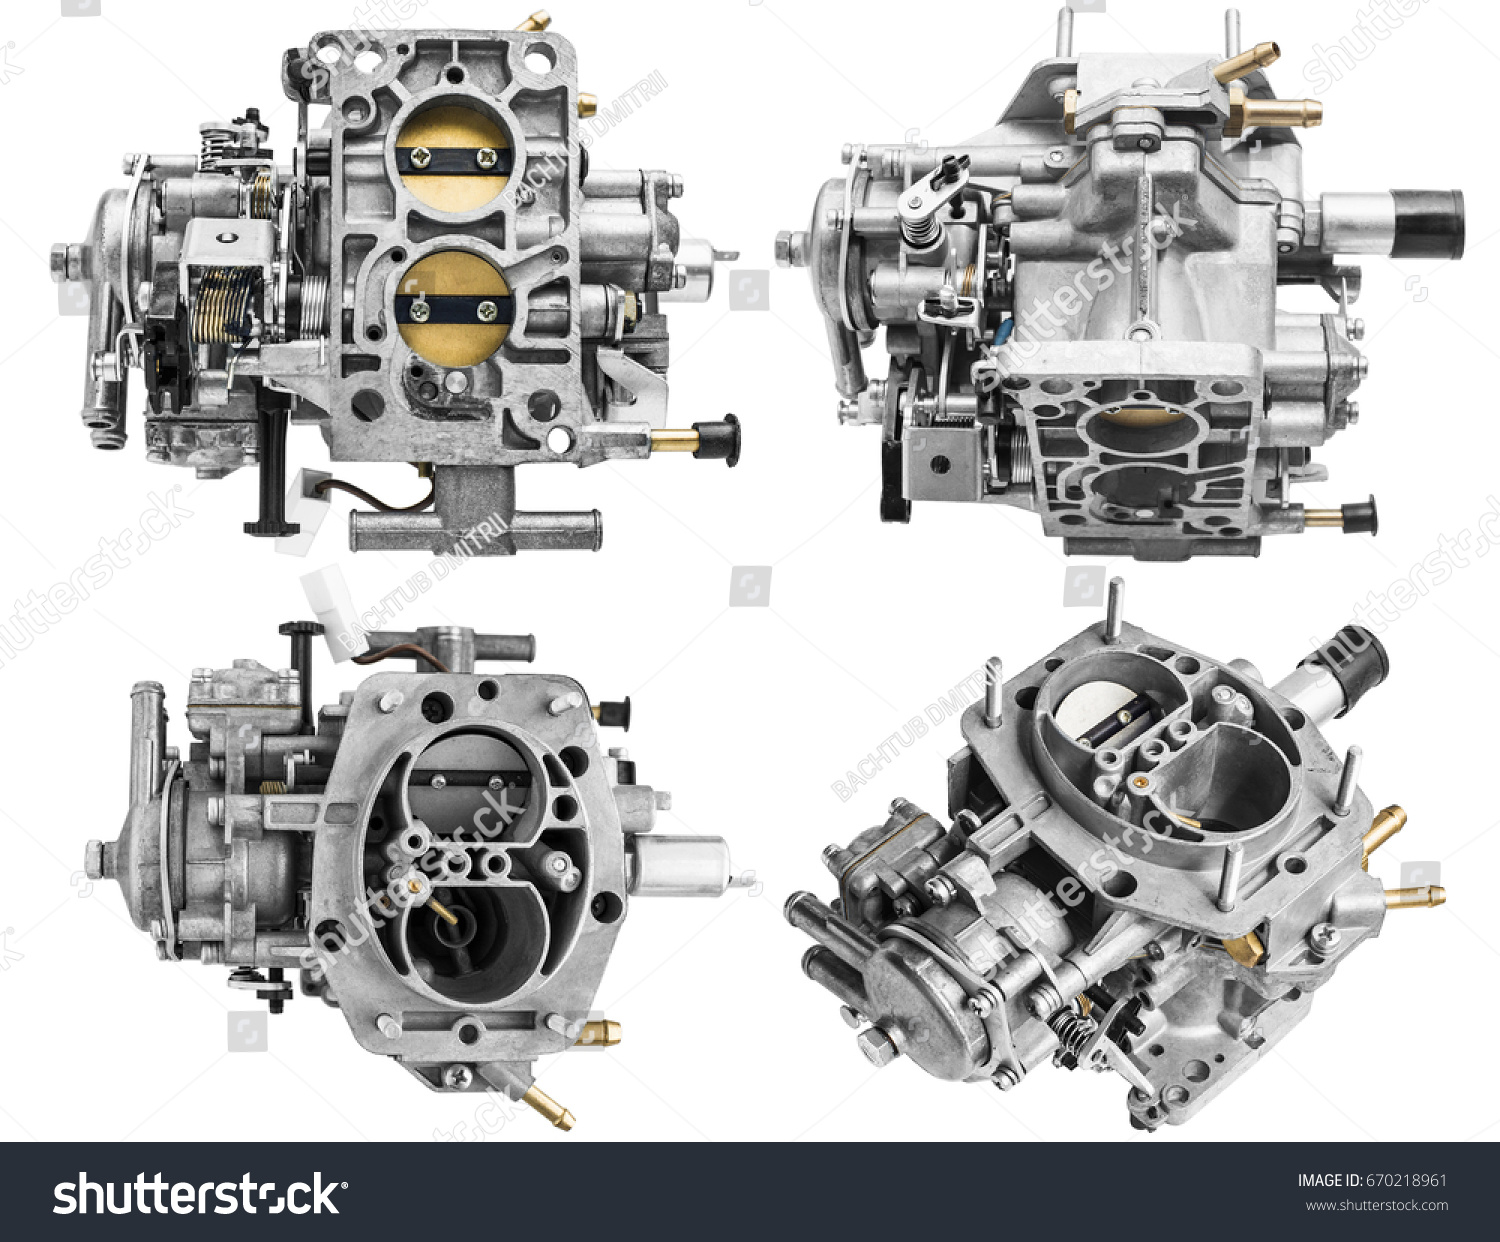 Car carburetor in different positions on a white background with shallow depth of field #670218961